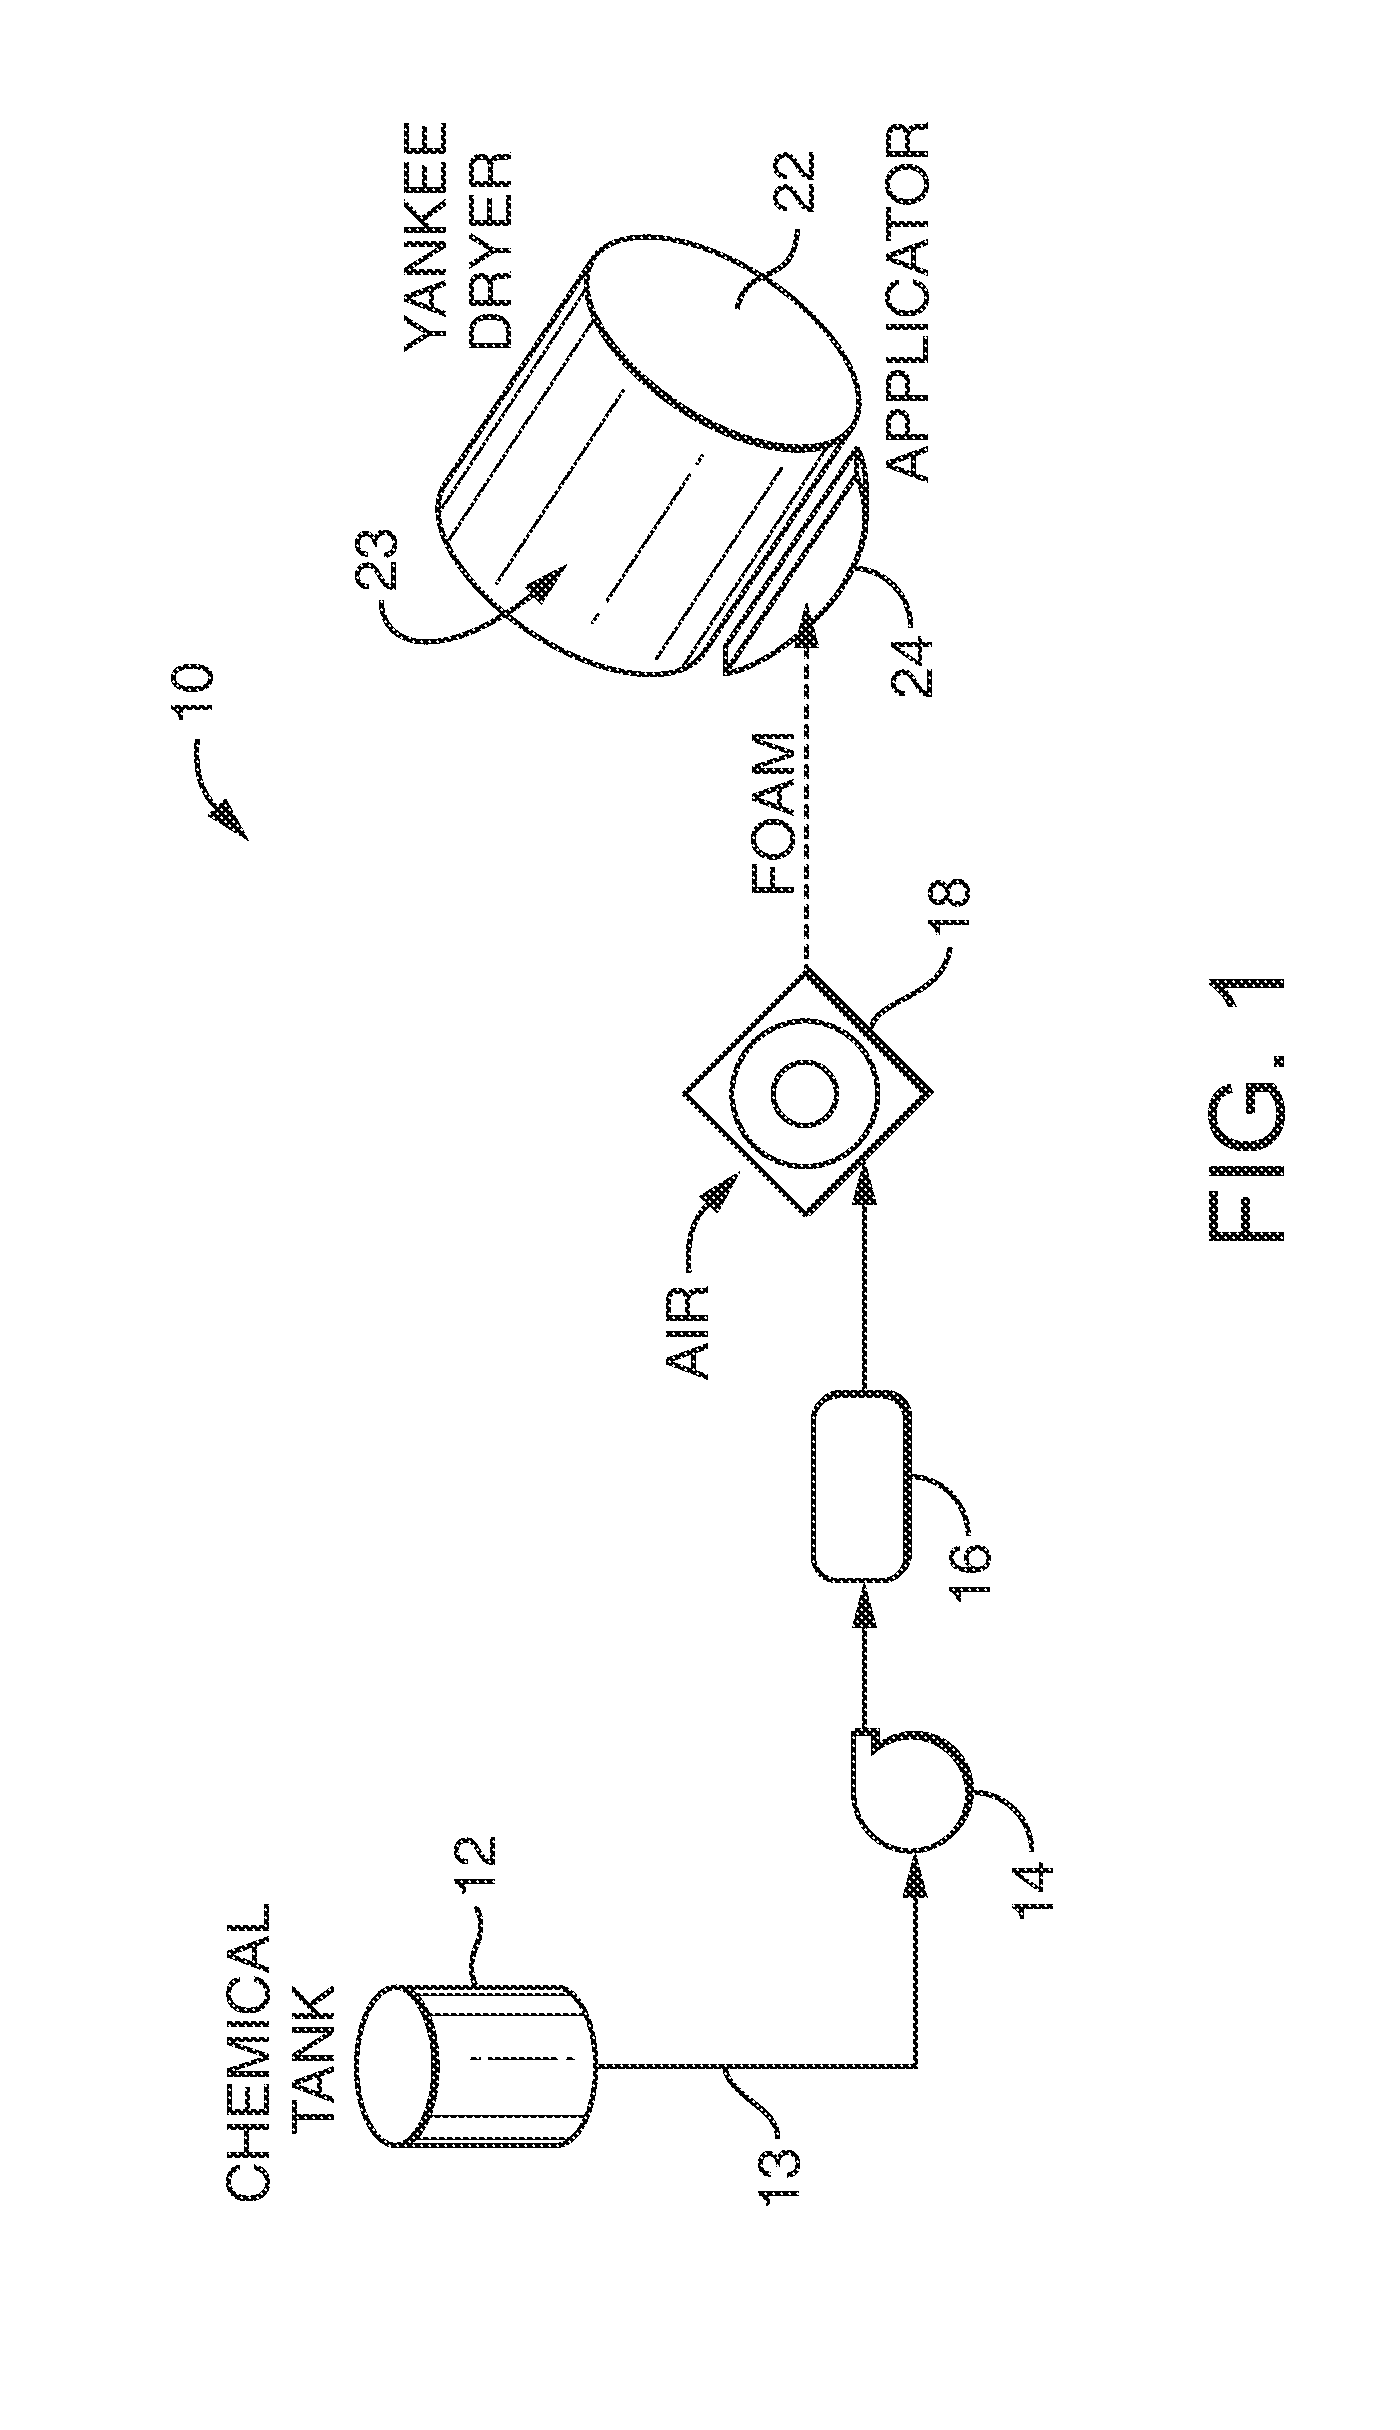 Substrates comprising frothed benefit agents and the method of making the same